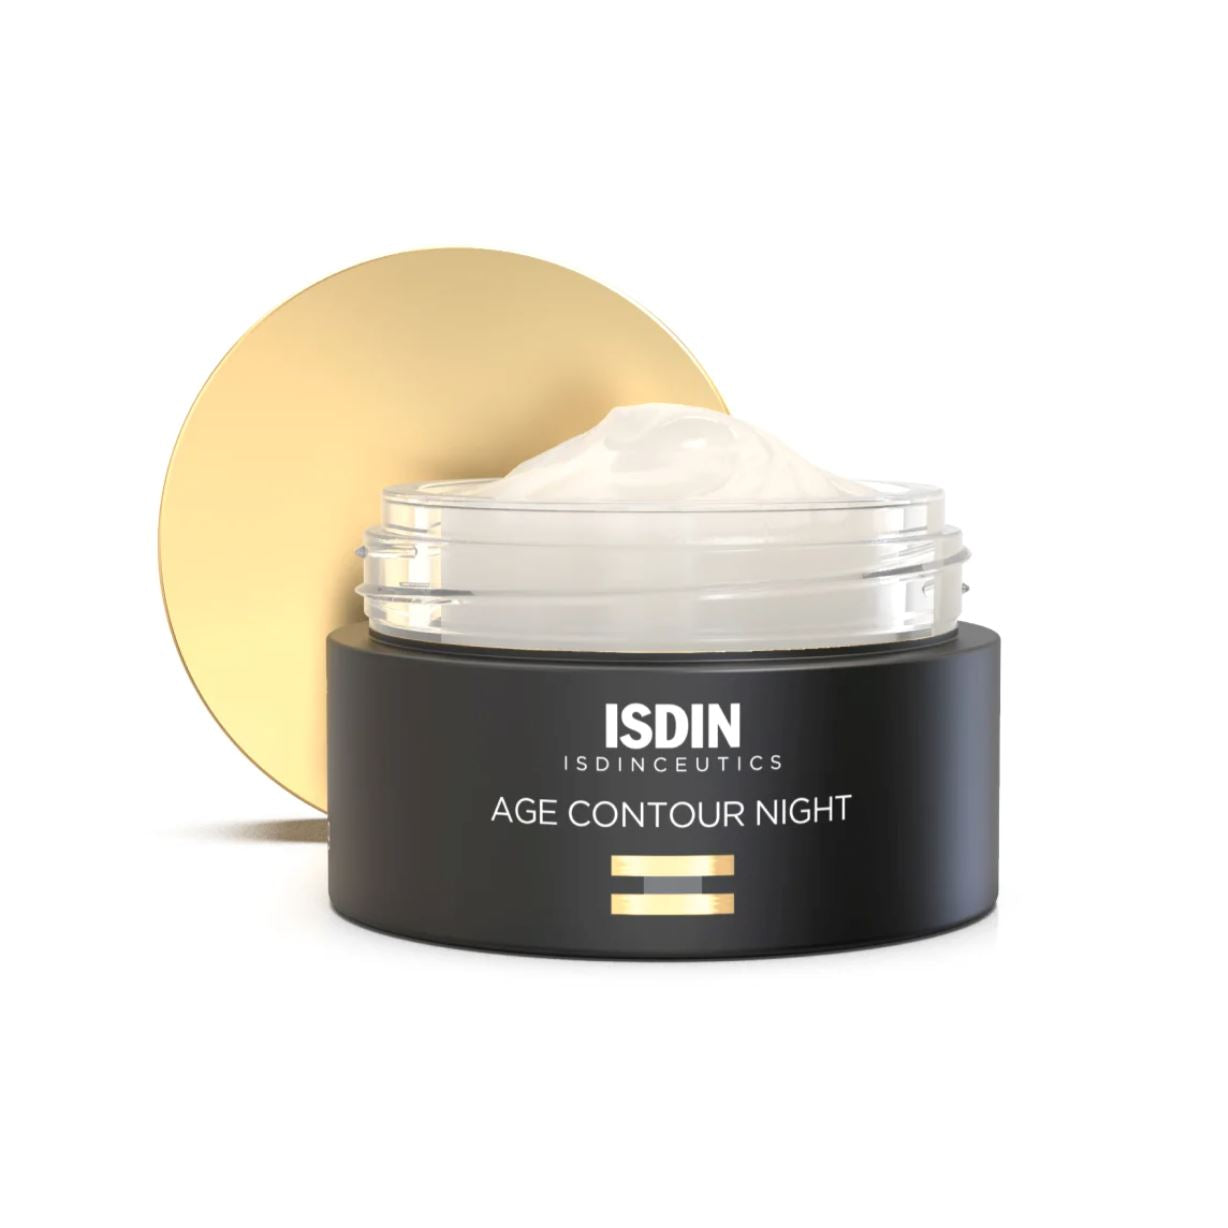 ISDIN Age Contour Night ISDIN 1.8 fl. oz. Shop at Exclusive Beauty Club